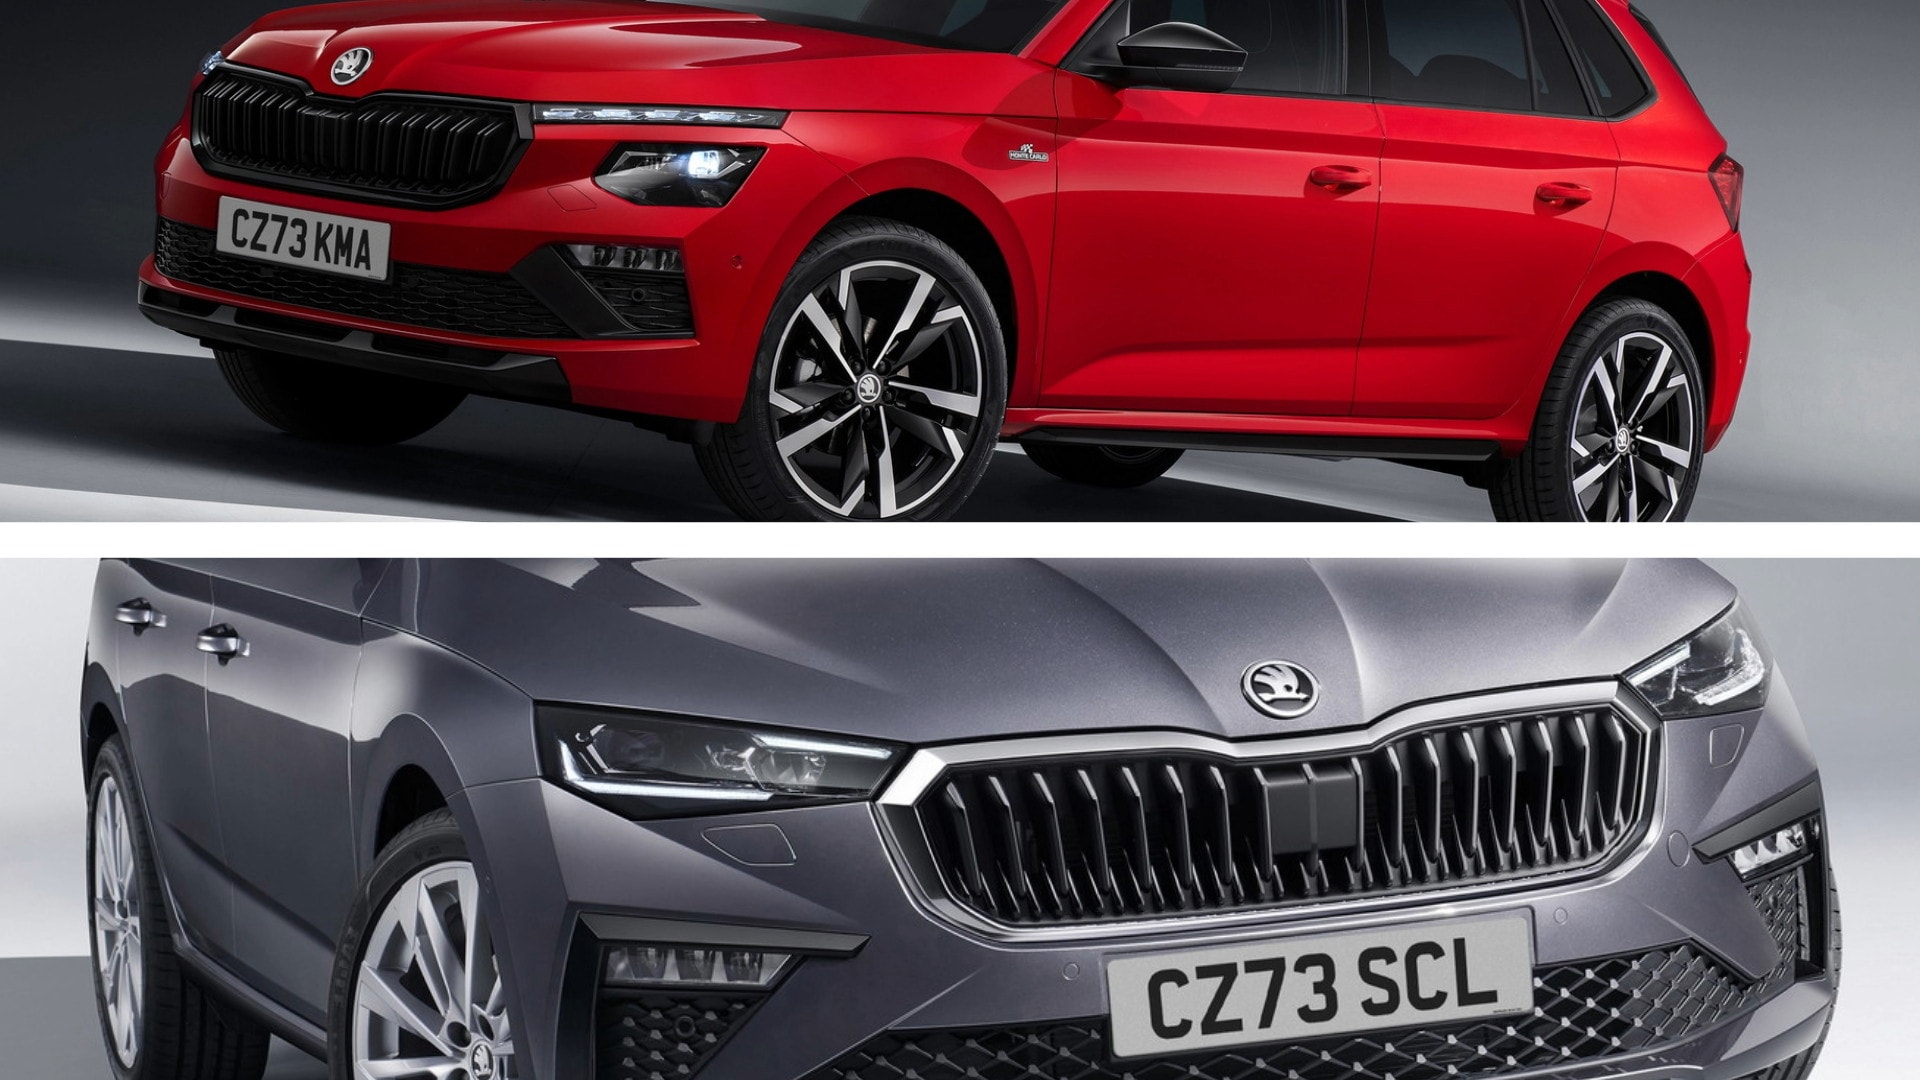 Facelifted Skoda Scala and Kamiq Go on Sale, Monte Carlo Trim Tops the Lineup